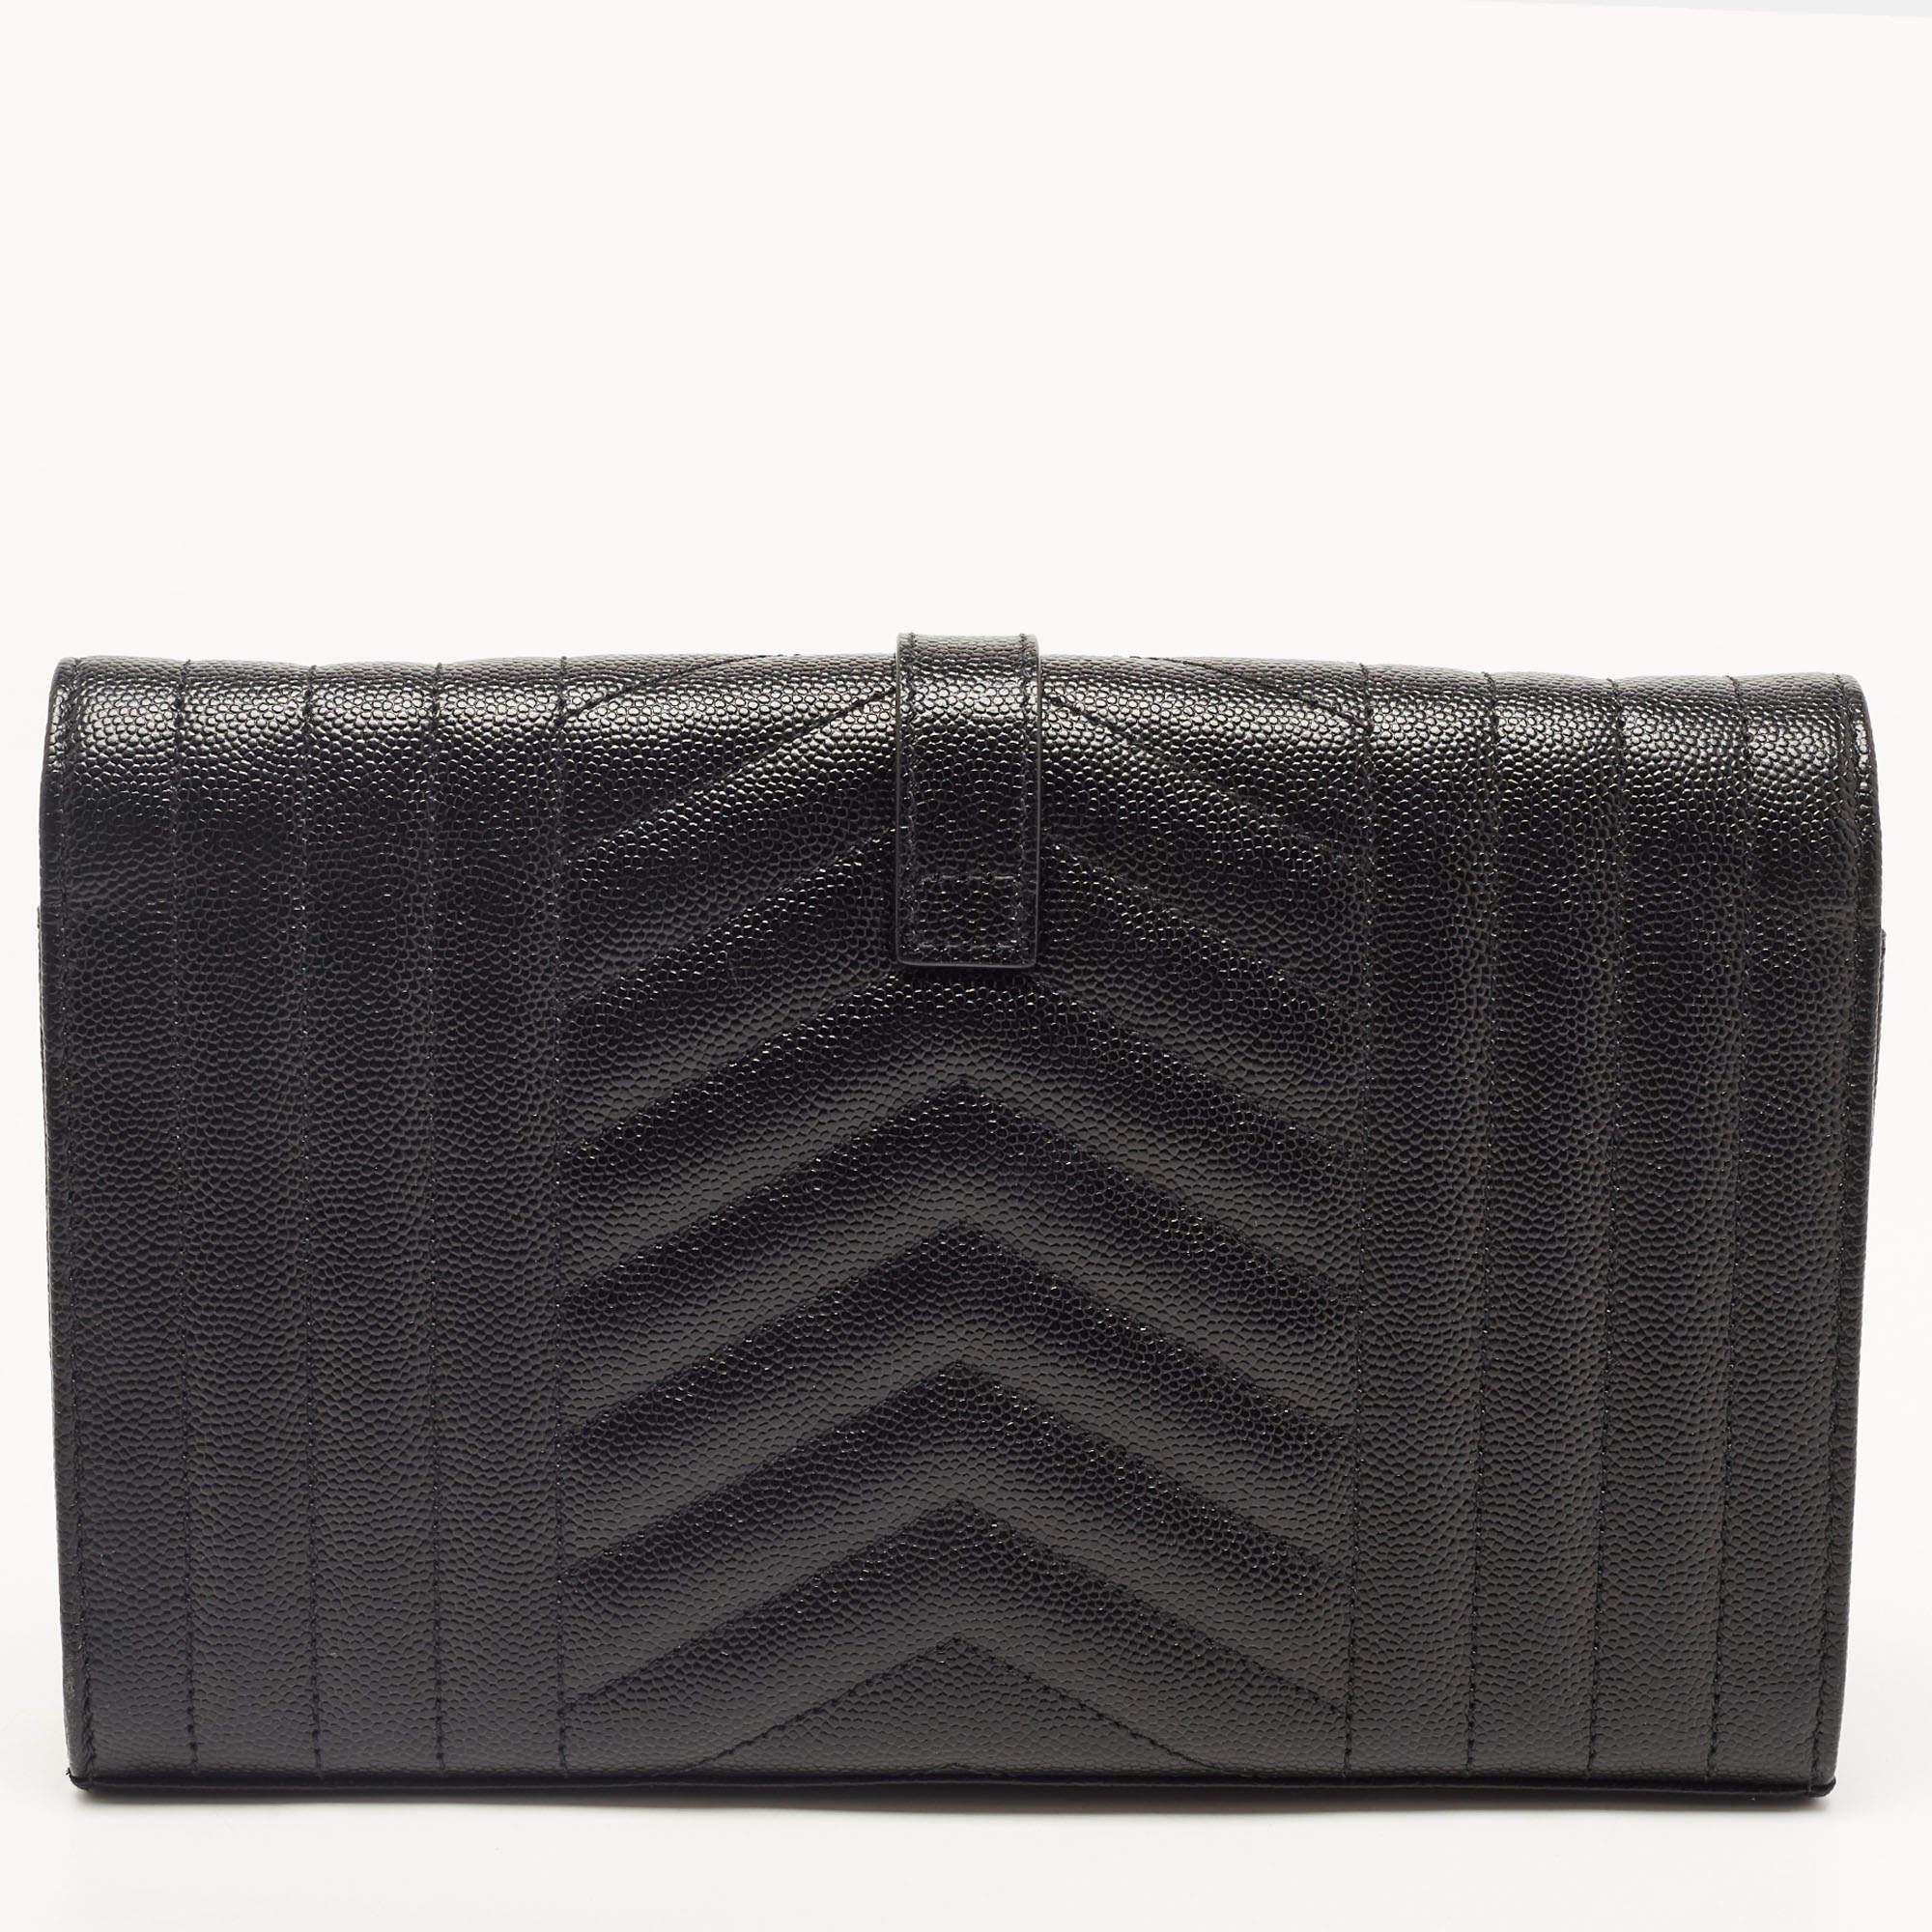 Every design from Saint Laurent has an everlasting impact on the fashion world. The envelope-style flap of this WOC features the iconic 'YSL' logo. It is designed using matelassé leather and has been made practical with a chain link and a luxurious